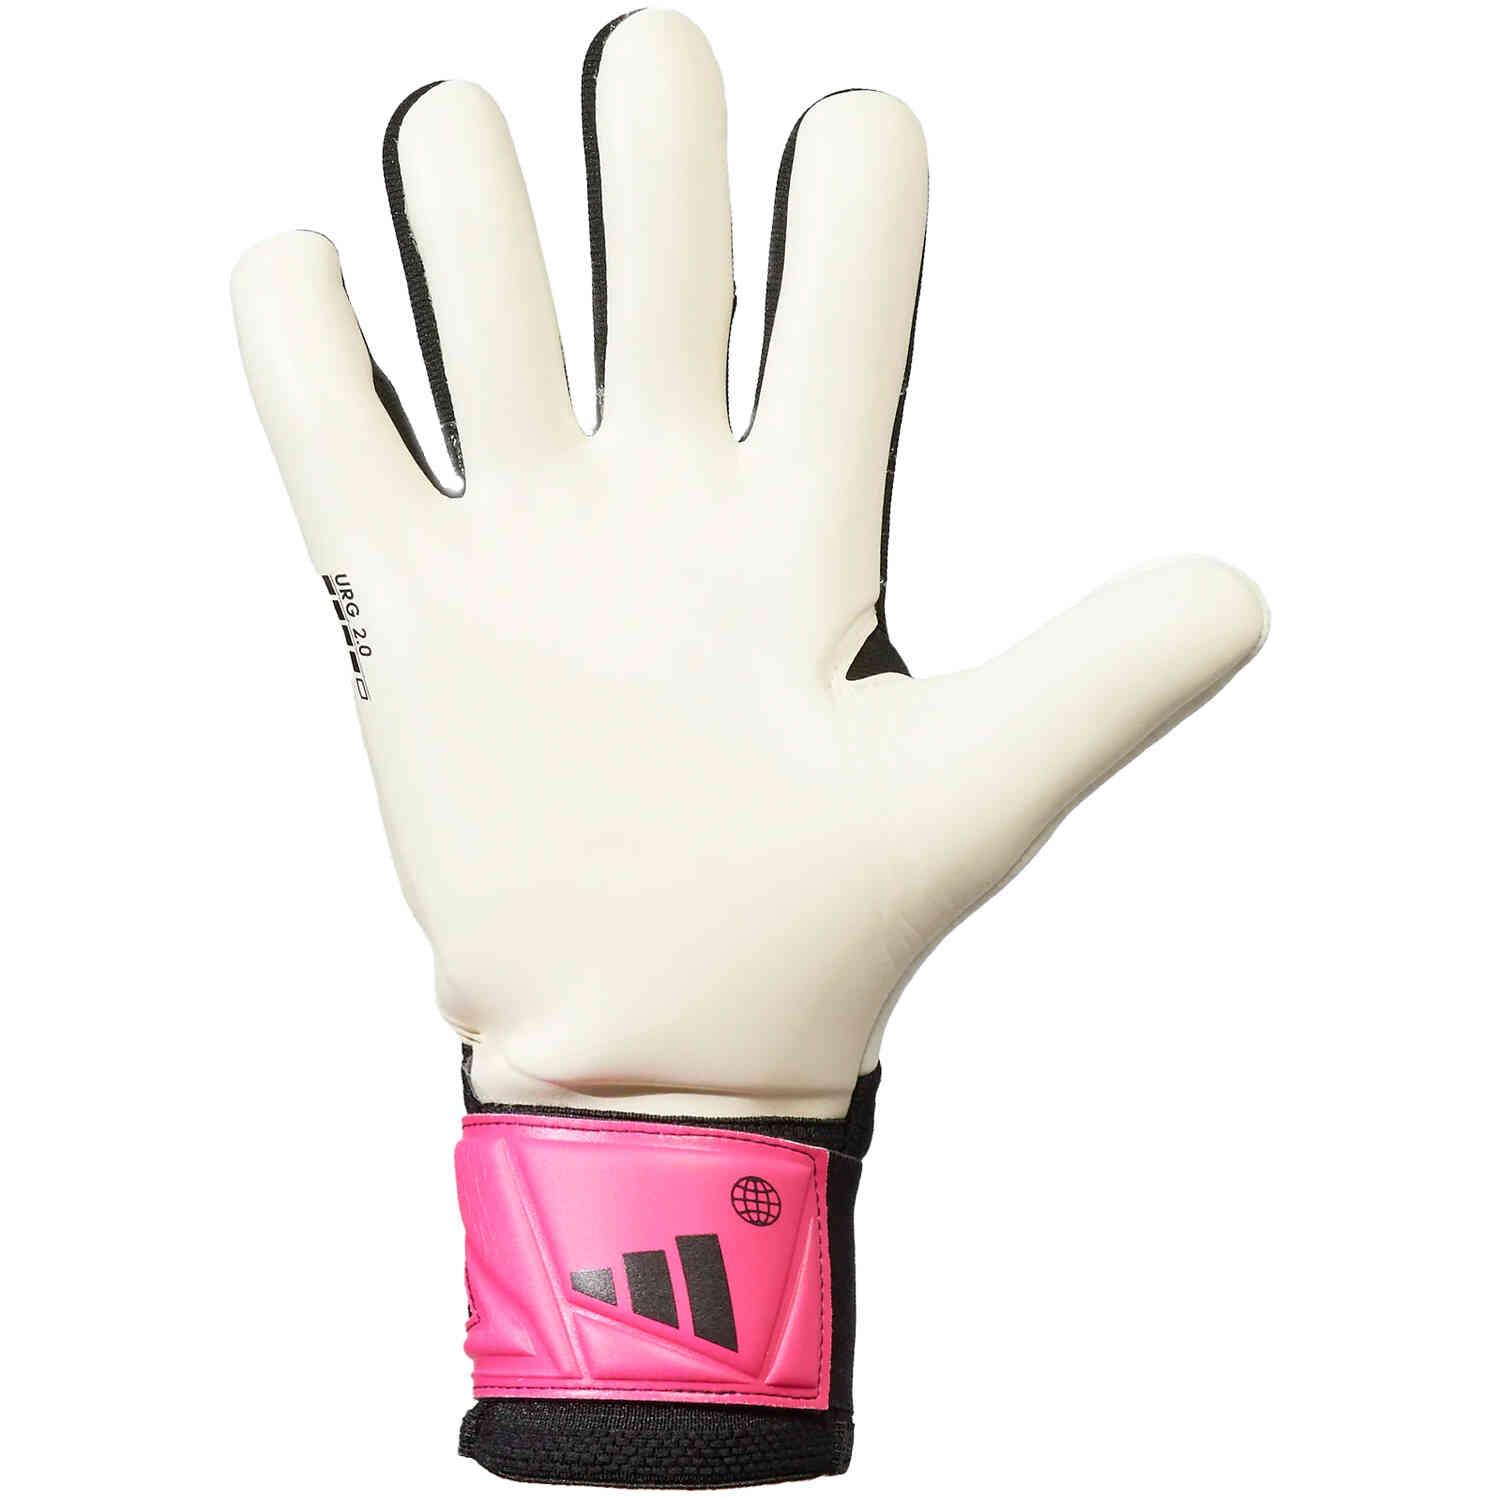 Partina City Fobia presente adidas Predator Competition Goalkeeper Gloves - Own Your Football Pack -  Soccer Master